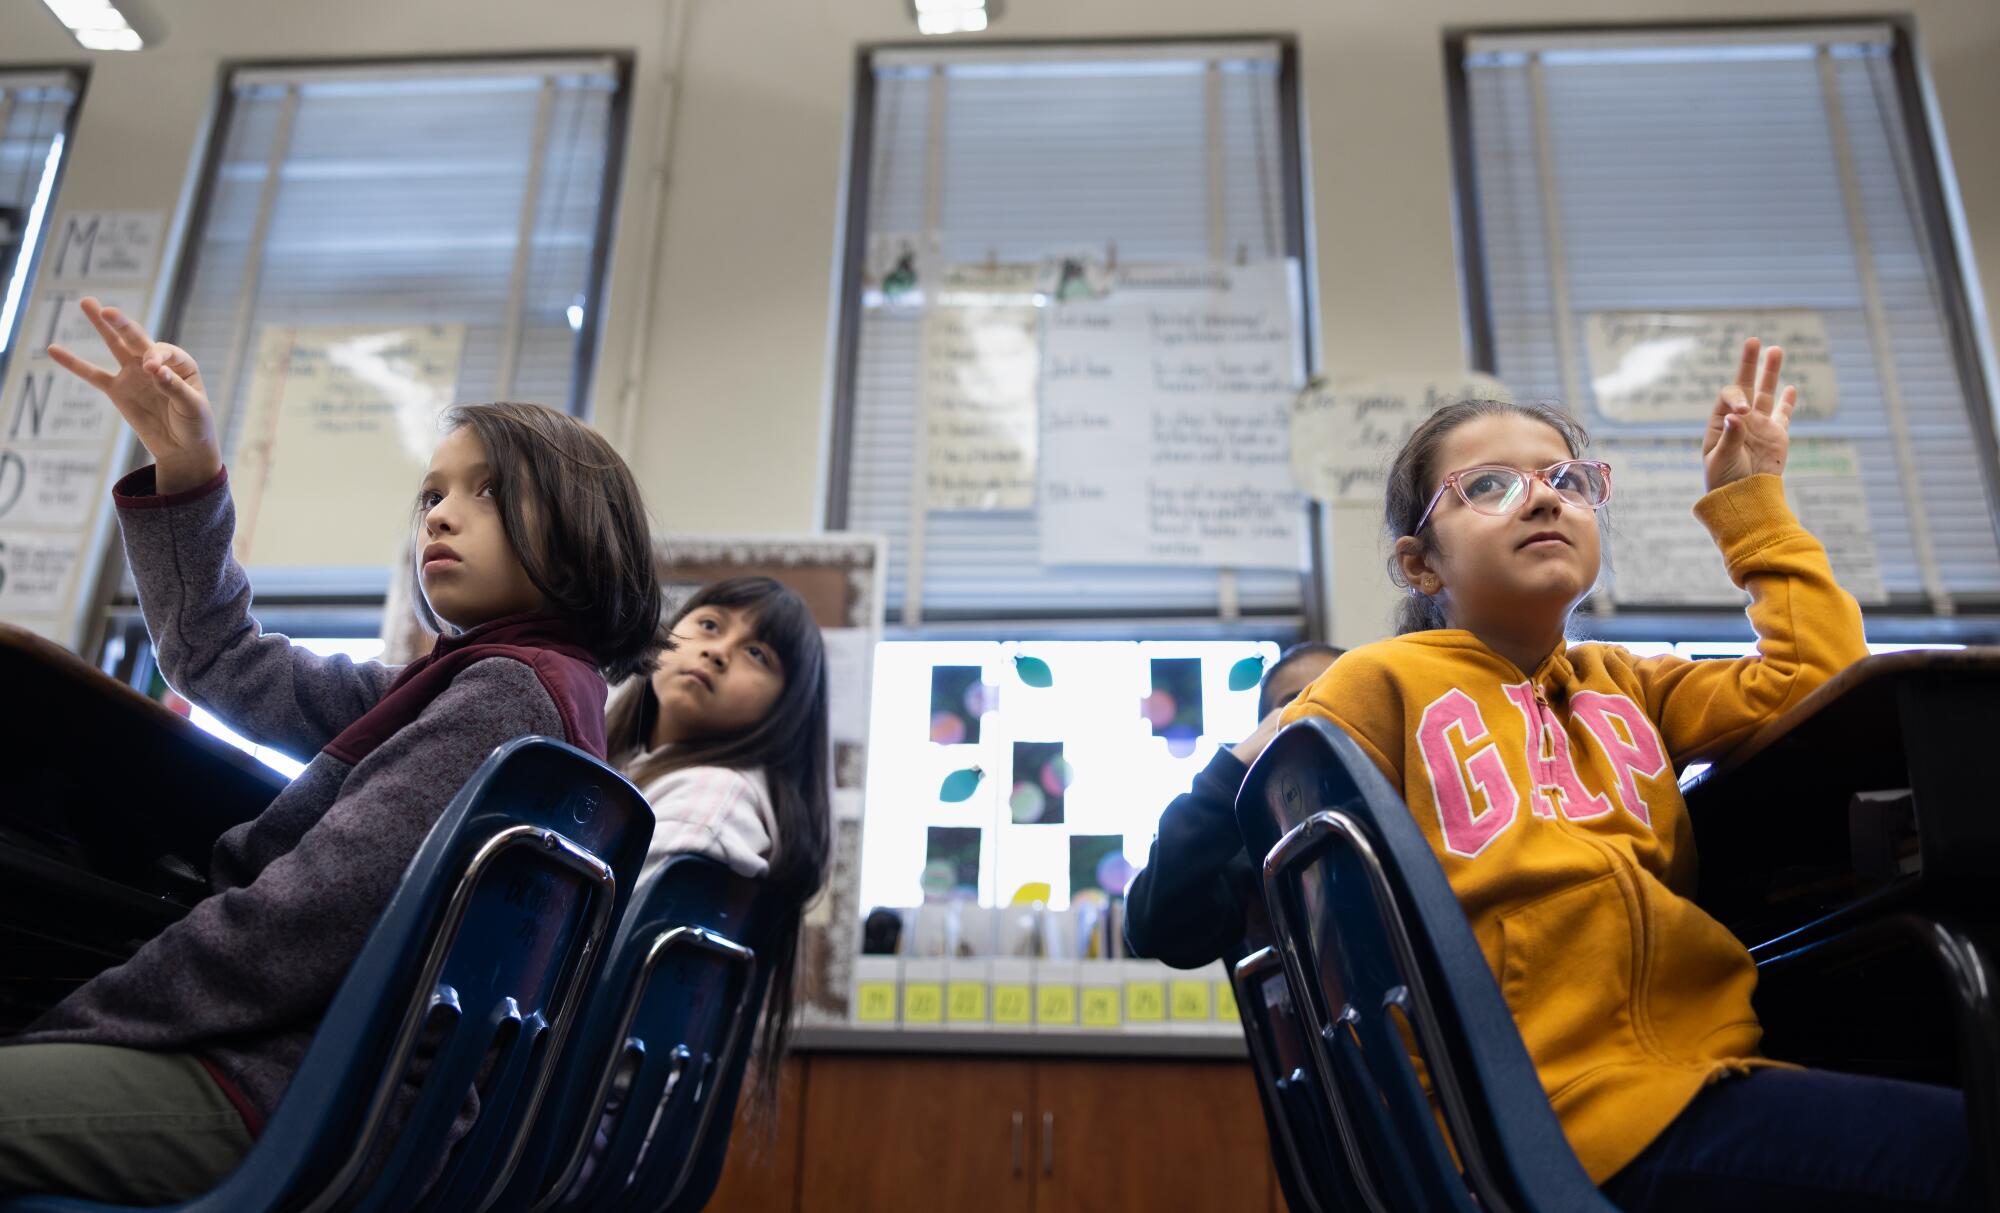 A group of fourth grade students sit at their desks.  